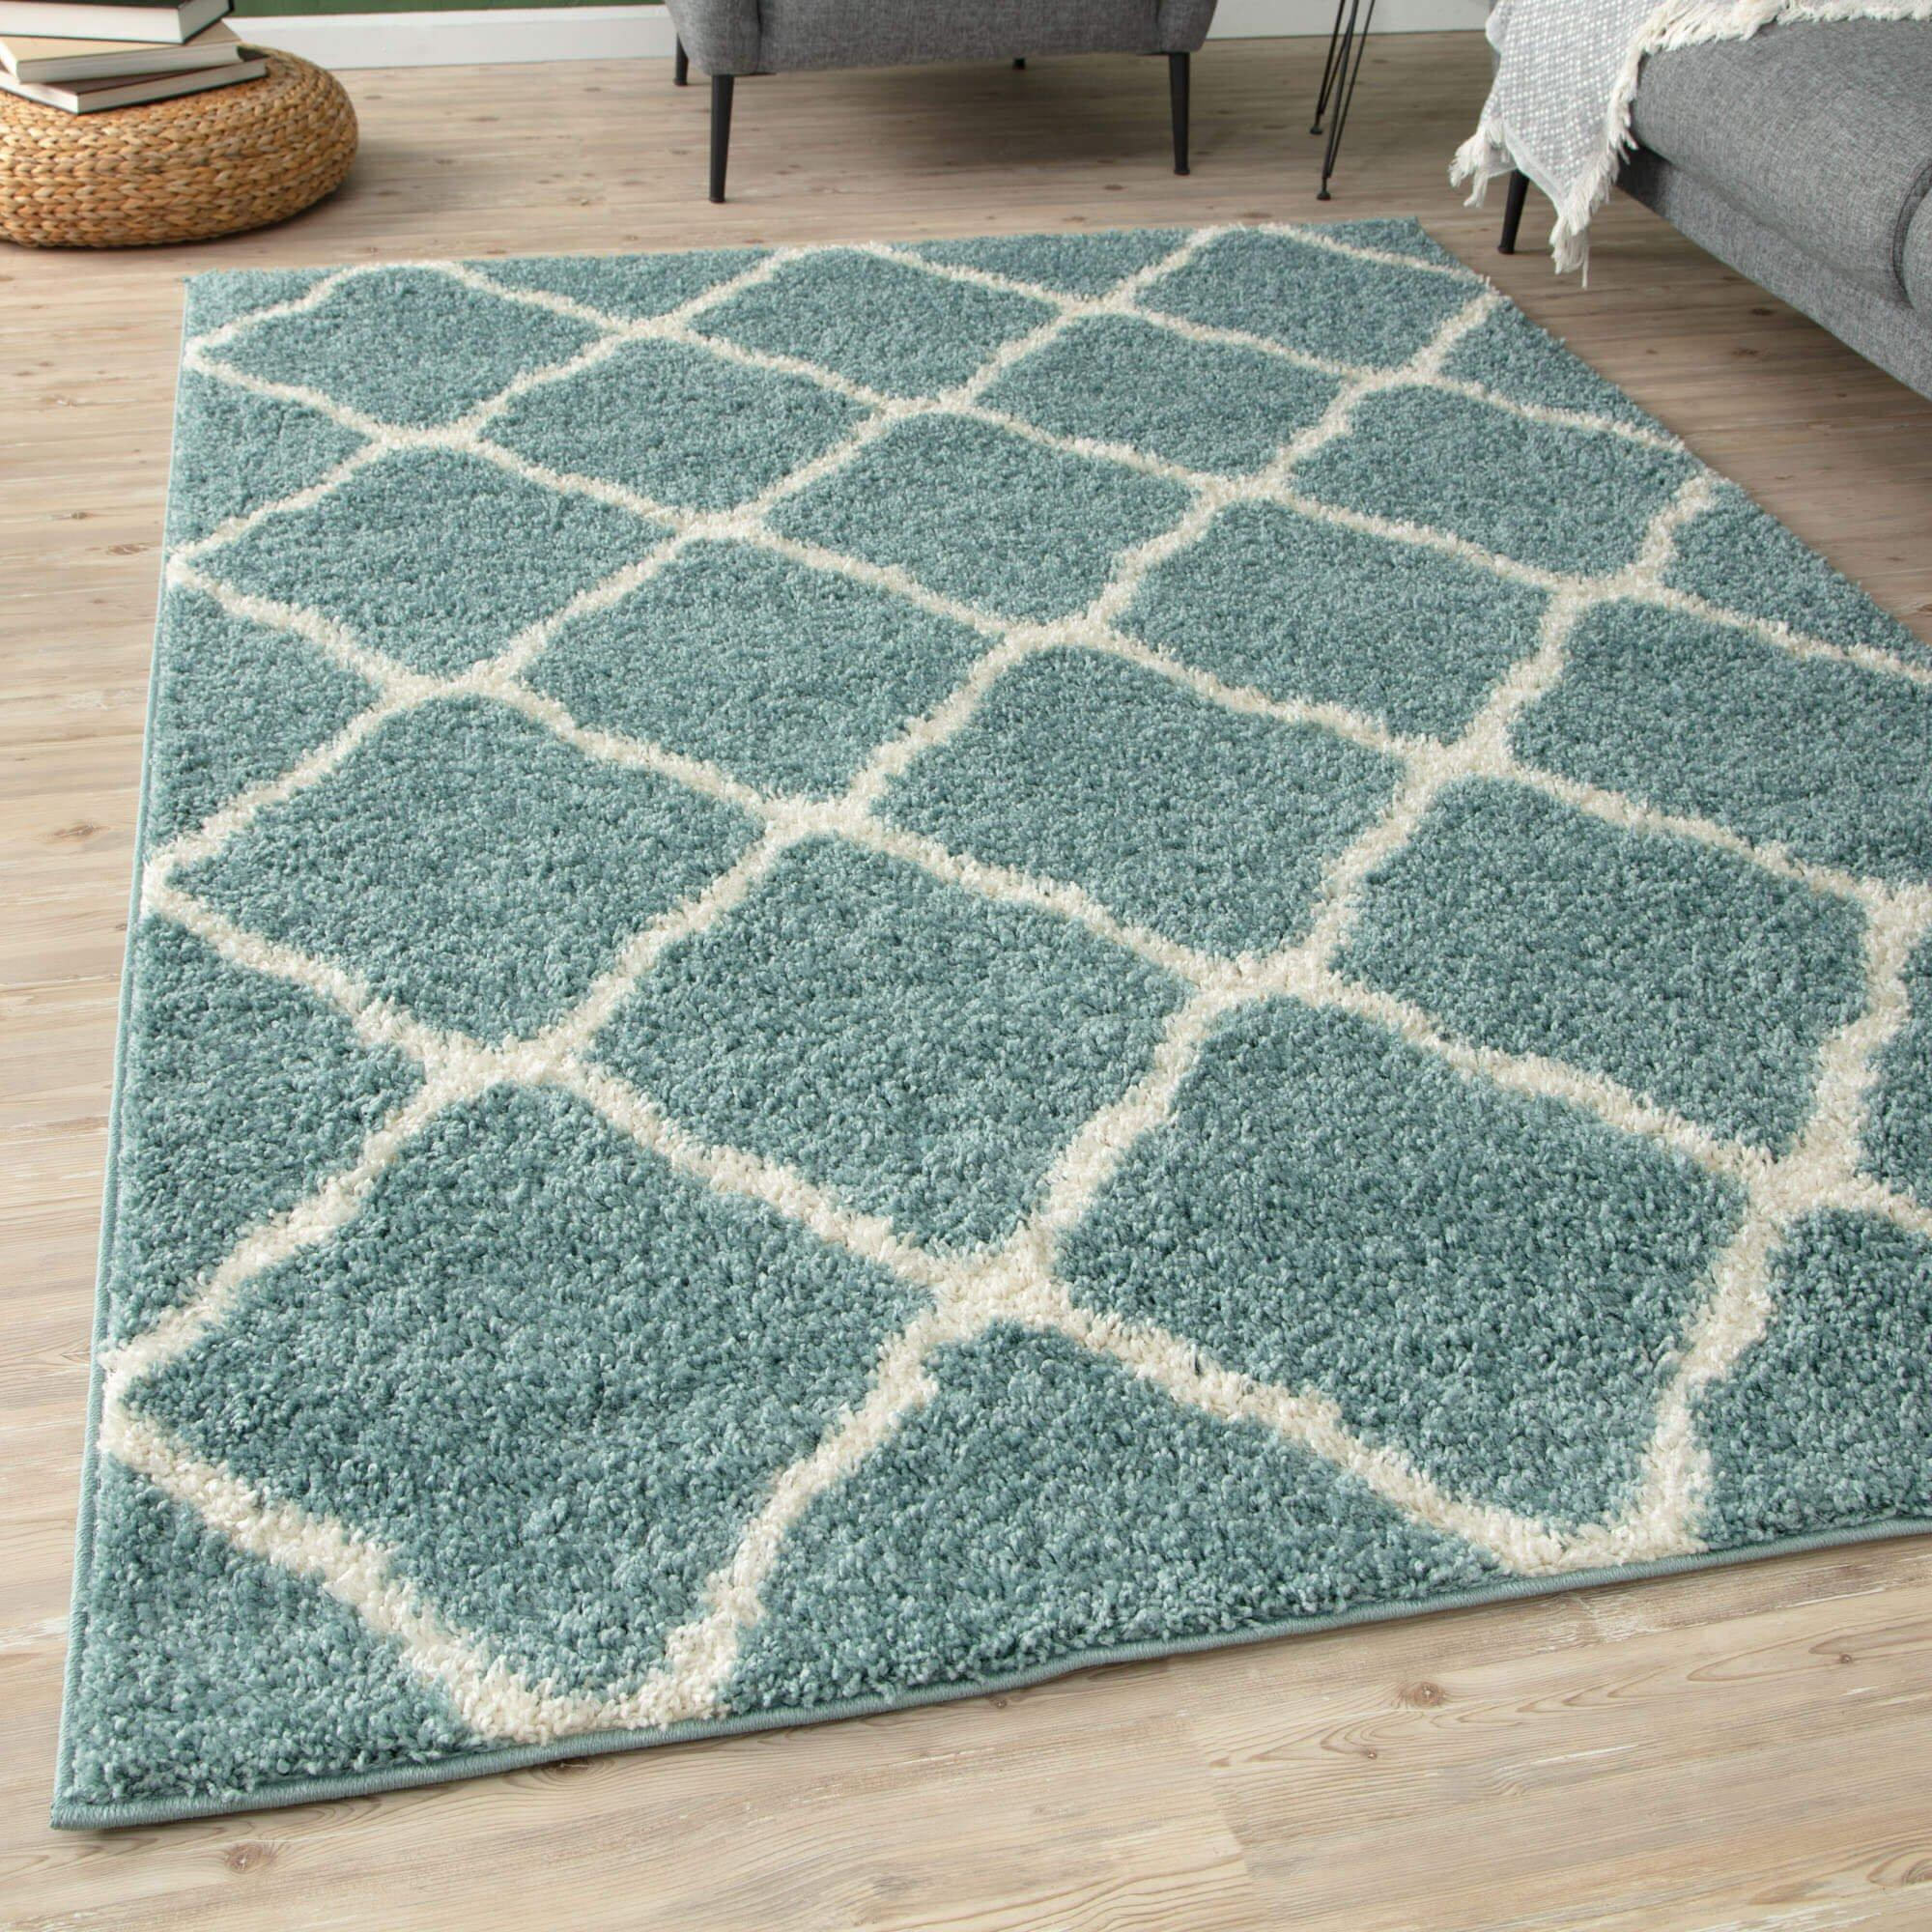 Myshaggy Collection Rugs Moroccan Design in Duck Egg Blue - 385DB - image 1